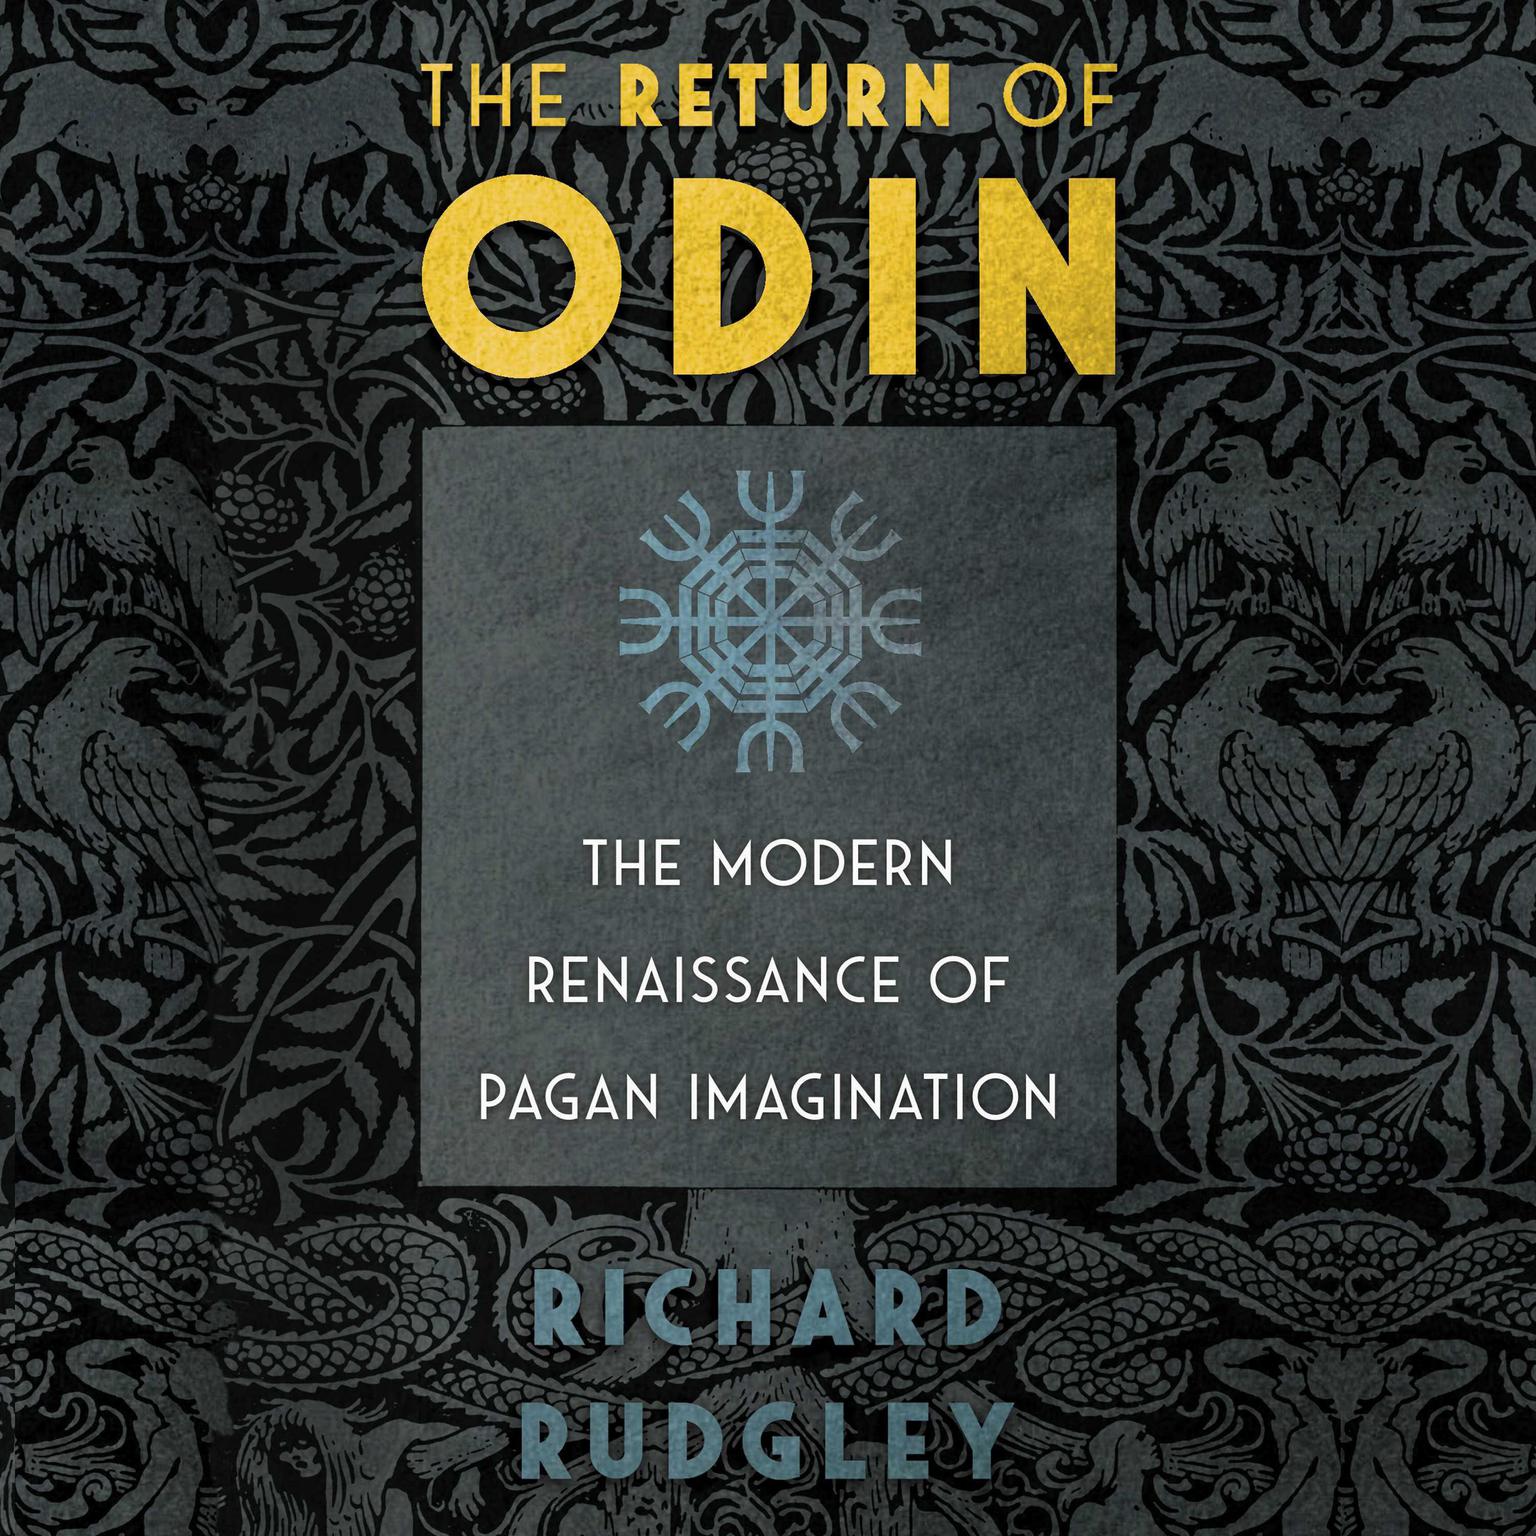 The Return of Odin: The Modern Renaissance of Pagan Imagination Audiobook, by Richard Rudgley